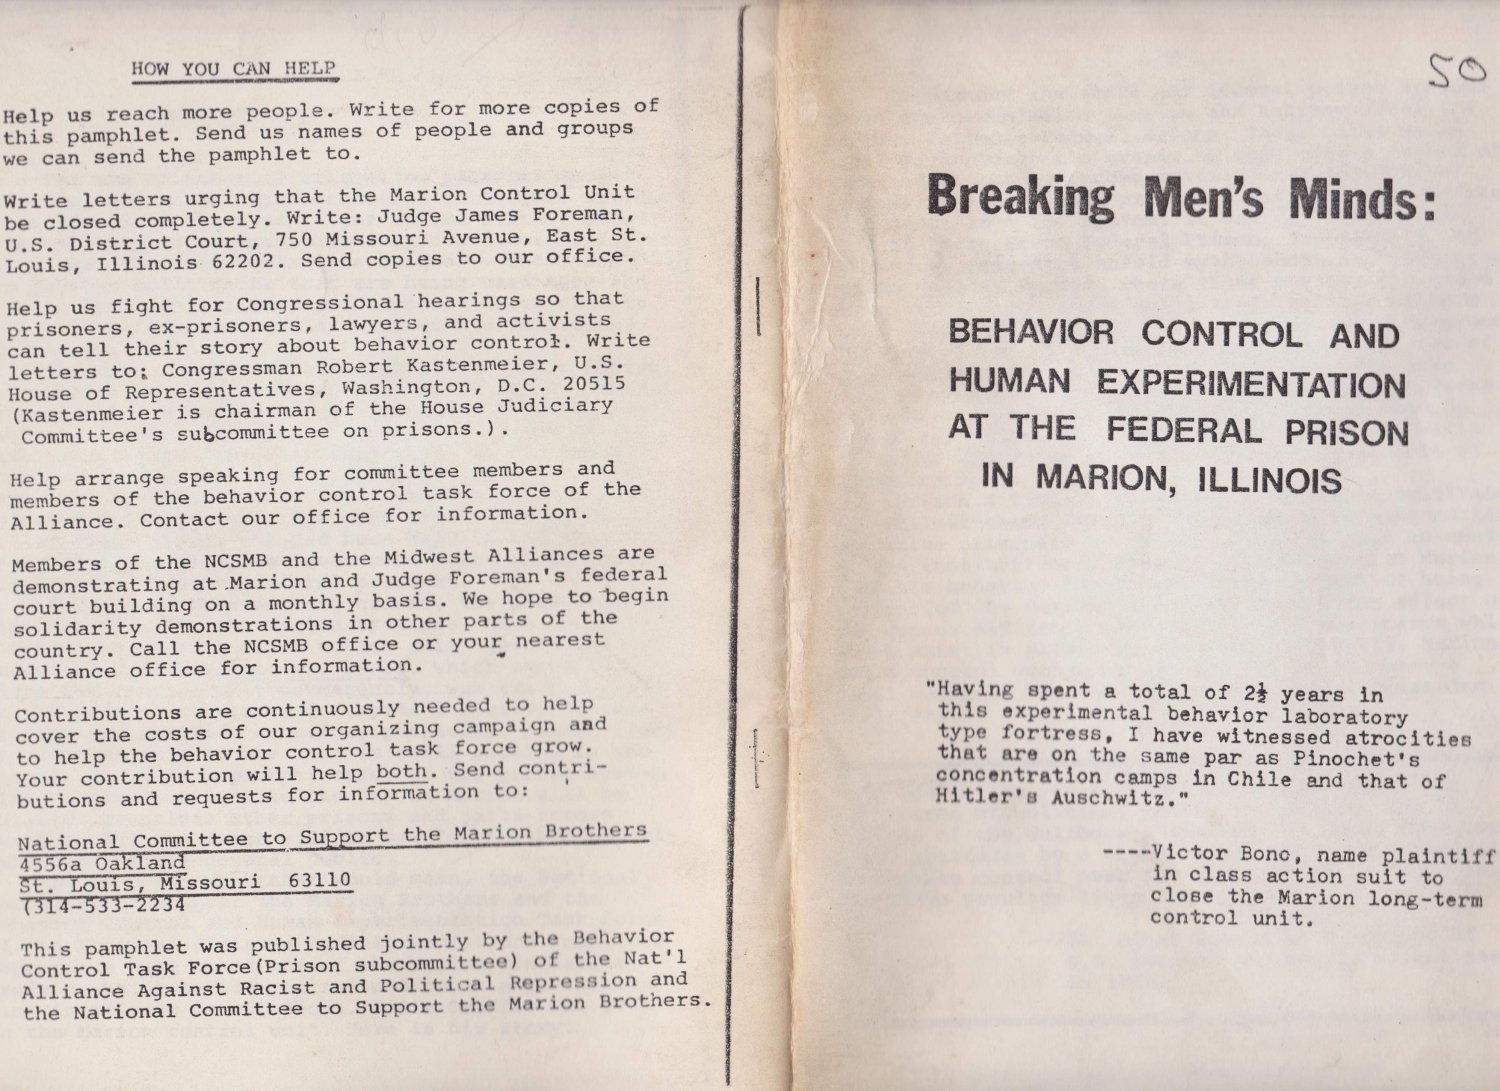 GRIFFIN, Eddie:  Breaking Men's Minds. Behavior Control and Human Experimentation at the Federal Prison in Marion, Illinois. (Copy of the original pamphlet concerning the Marion Control Unit). 